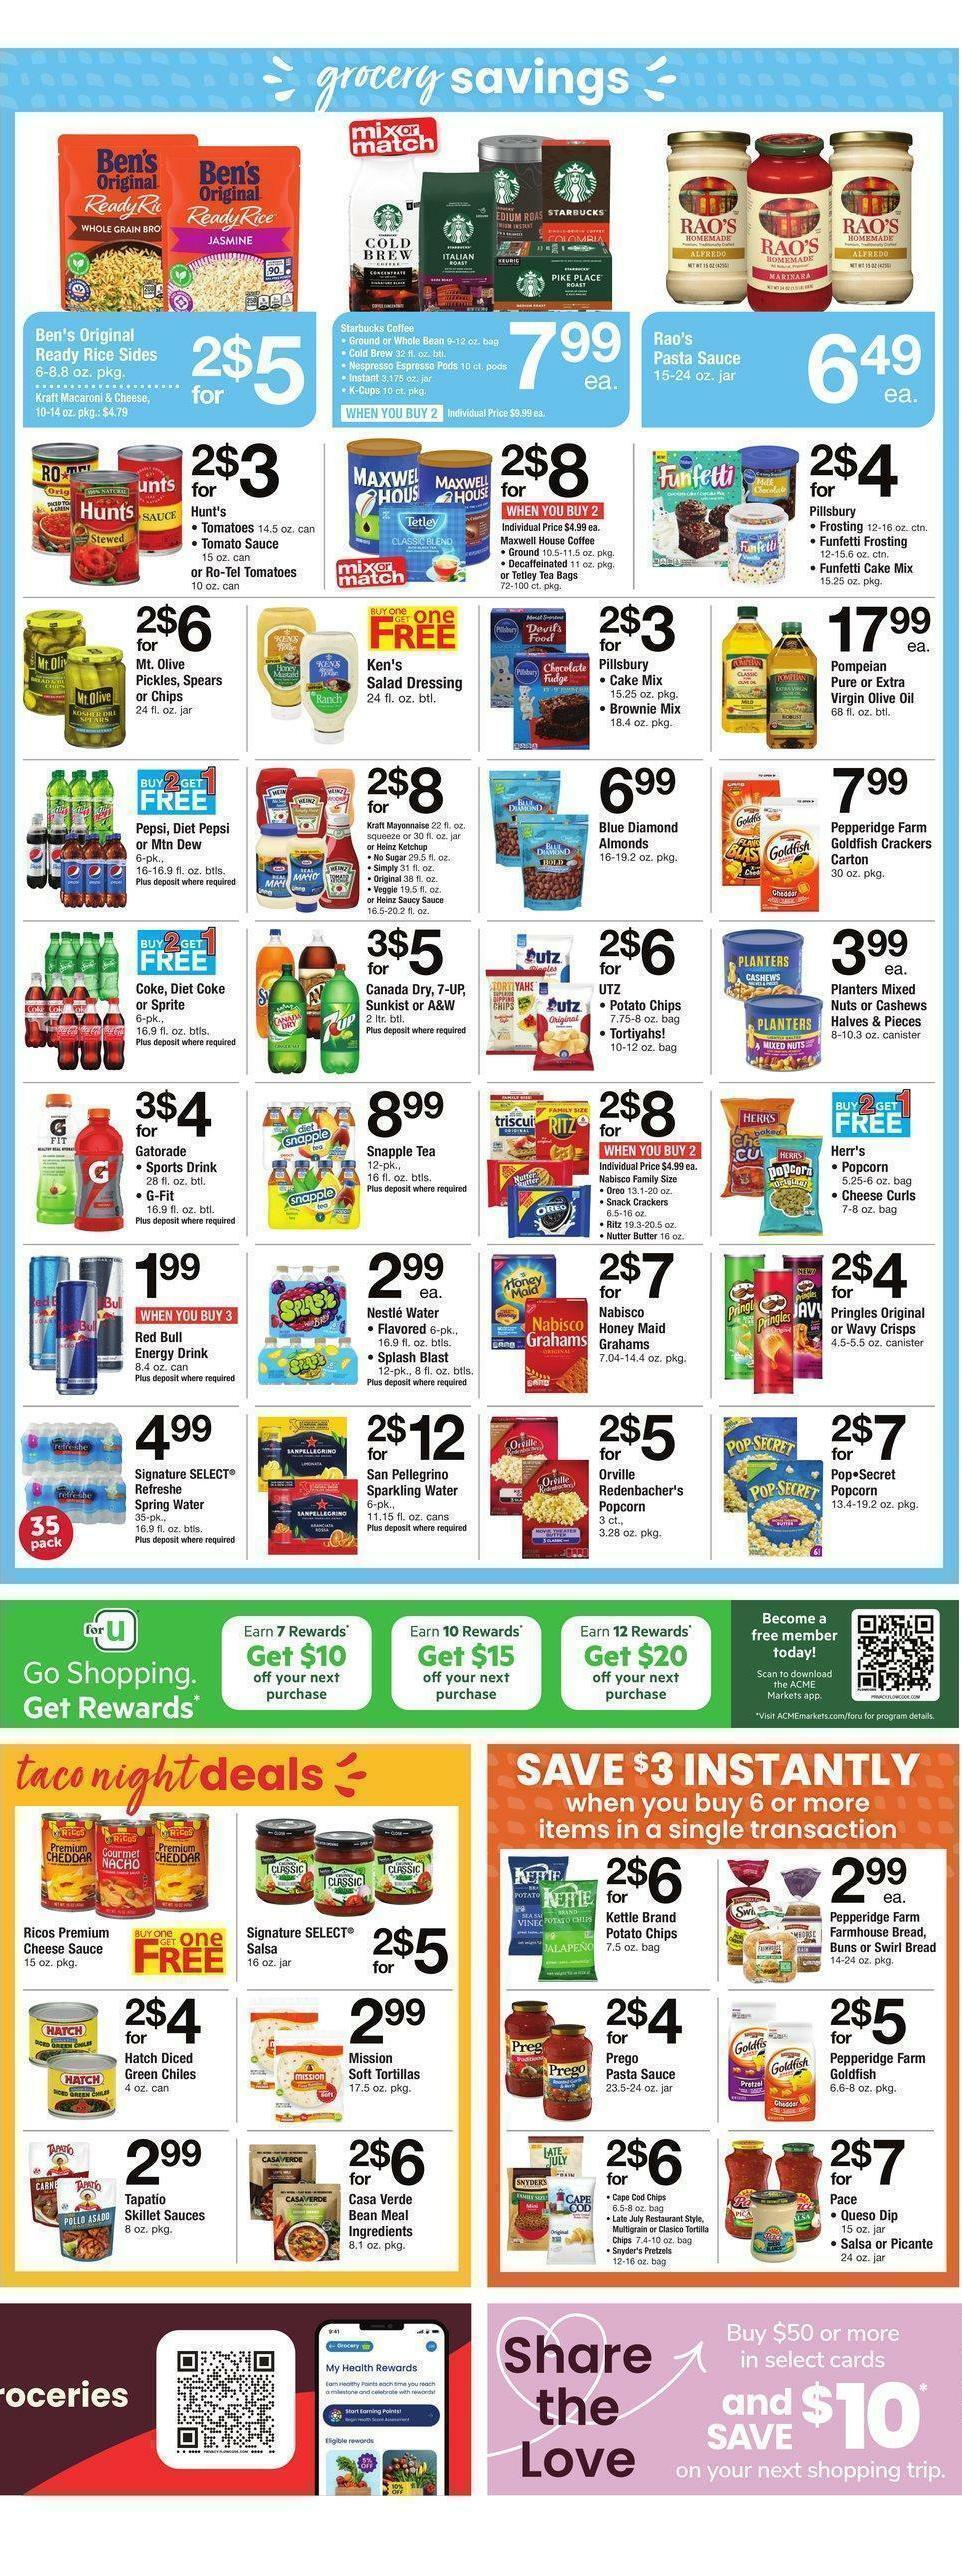 ACME Markets Weekly Ad from February 3